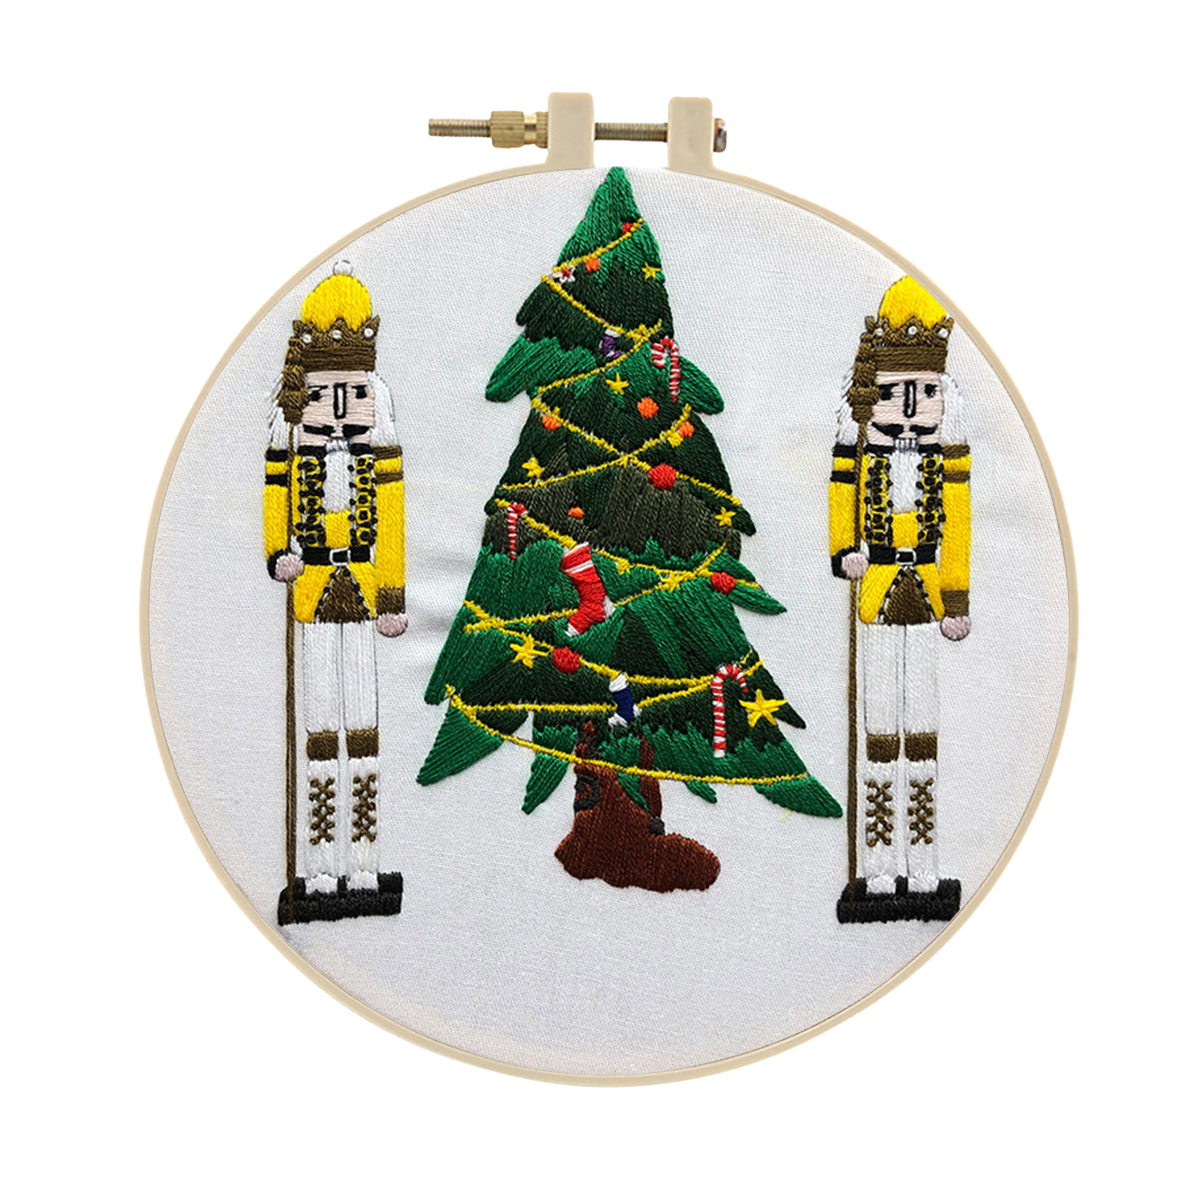 Christmas Embroidery Kits Cross stitch kits for Adult Beginner - Christmas Soldiers Pattern